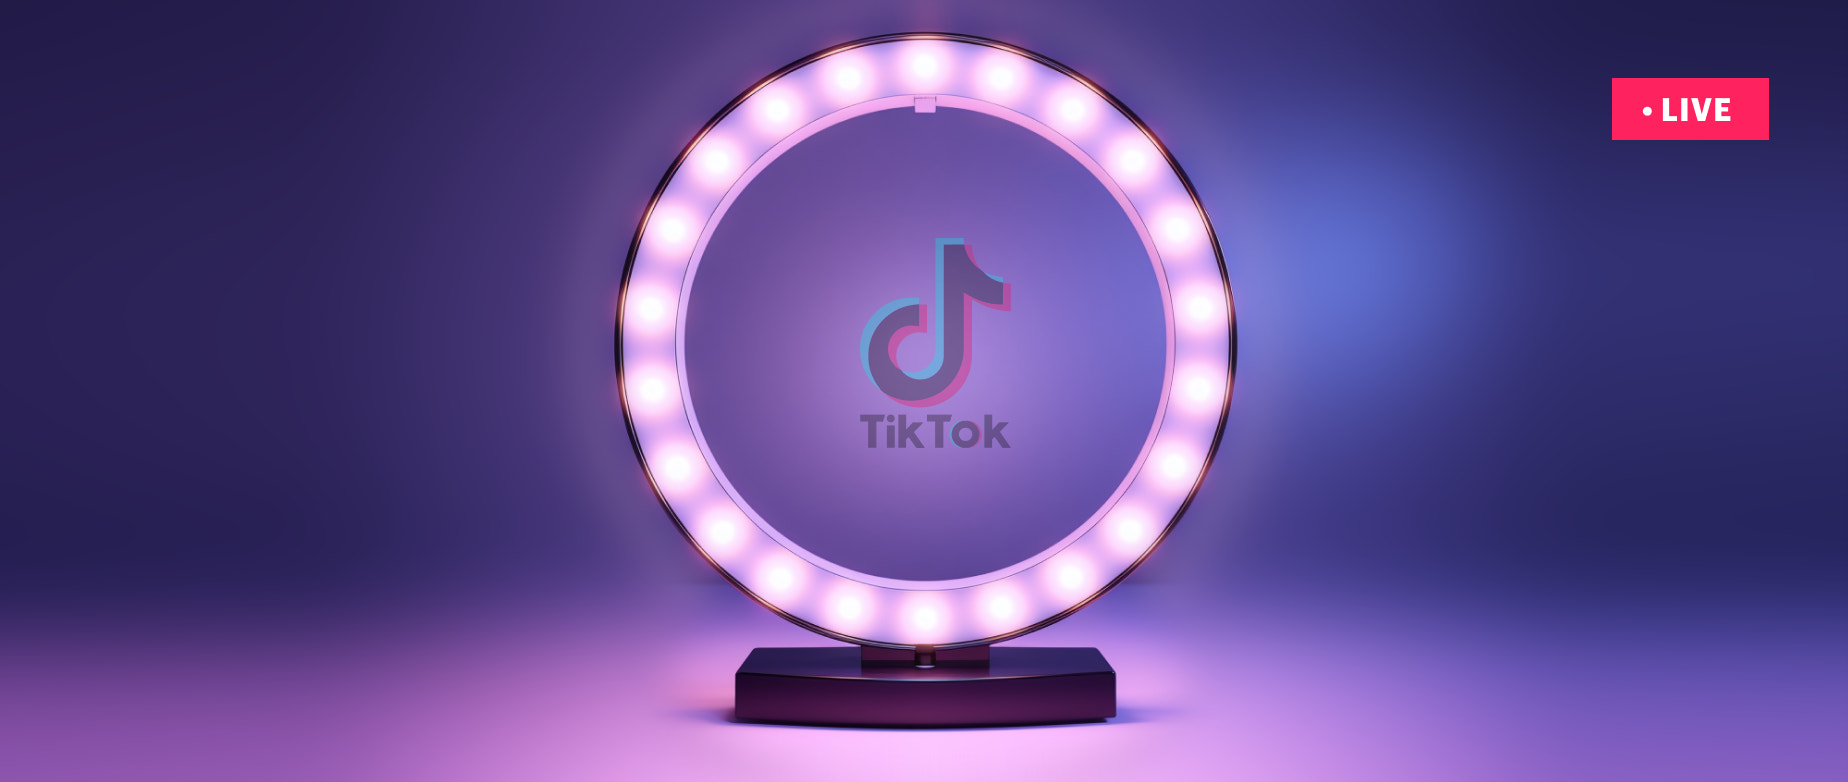 How To Tiktok Live Followers Count In Real Time